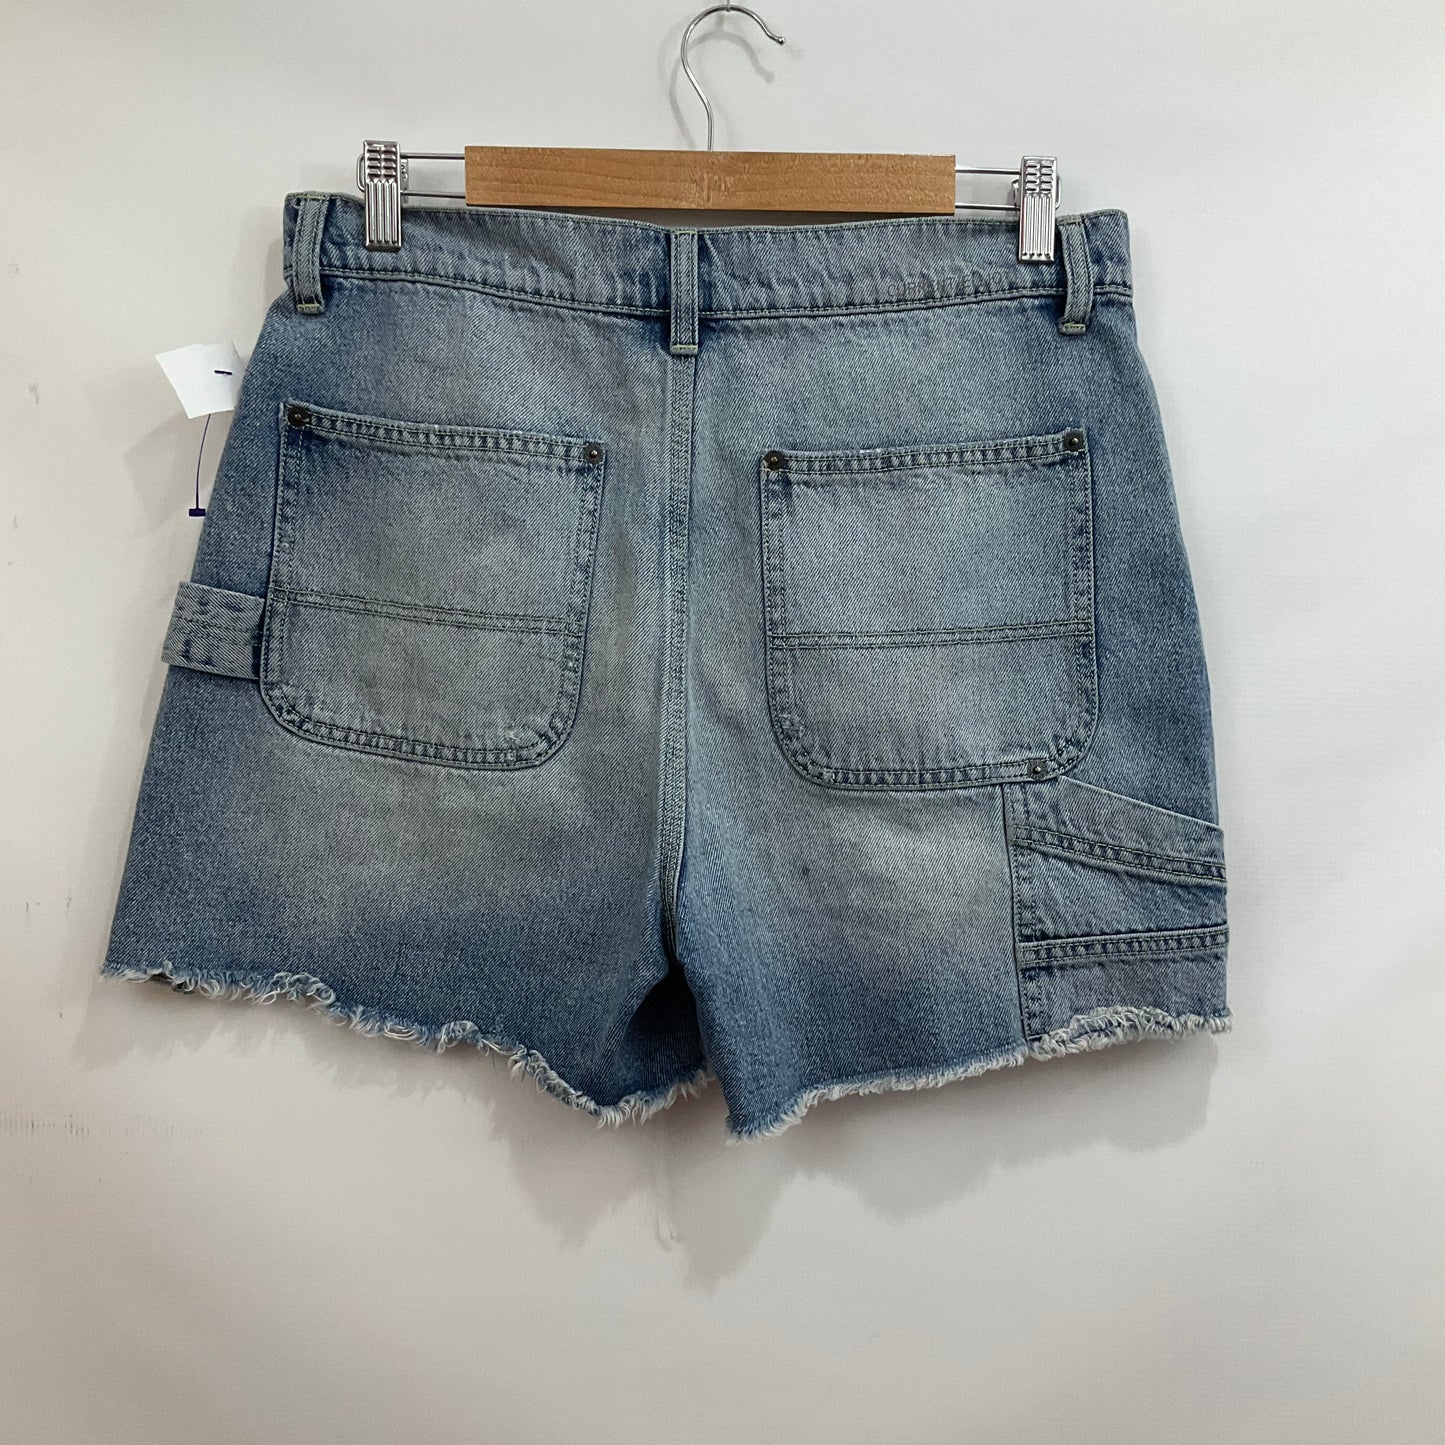 Shorts By Current Elliott  Size: 27